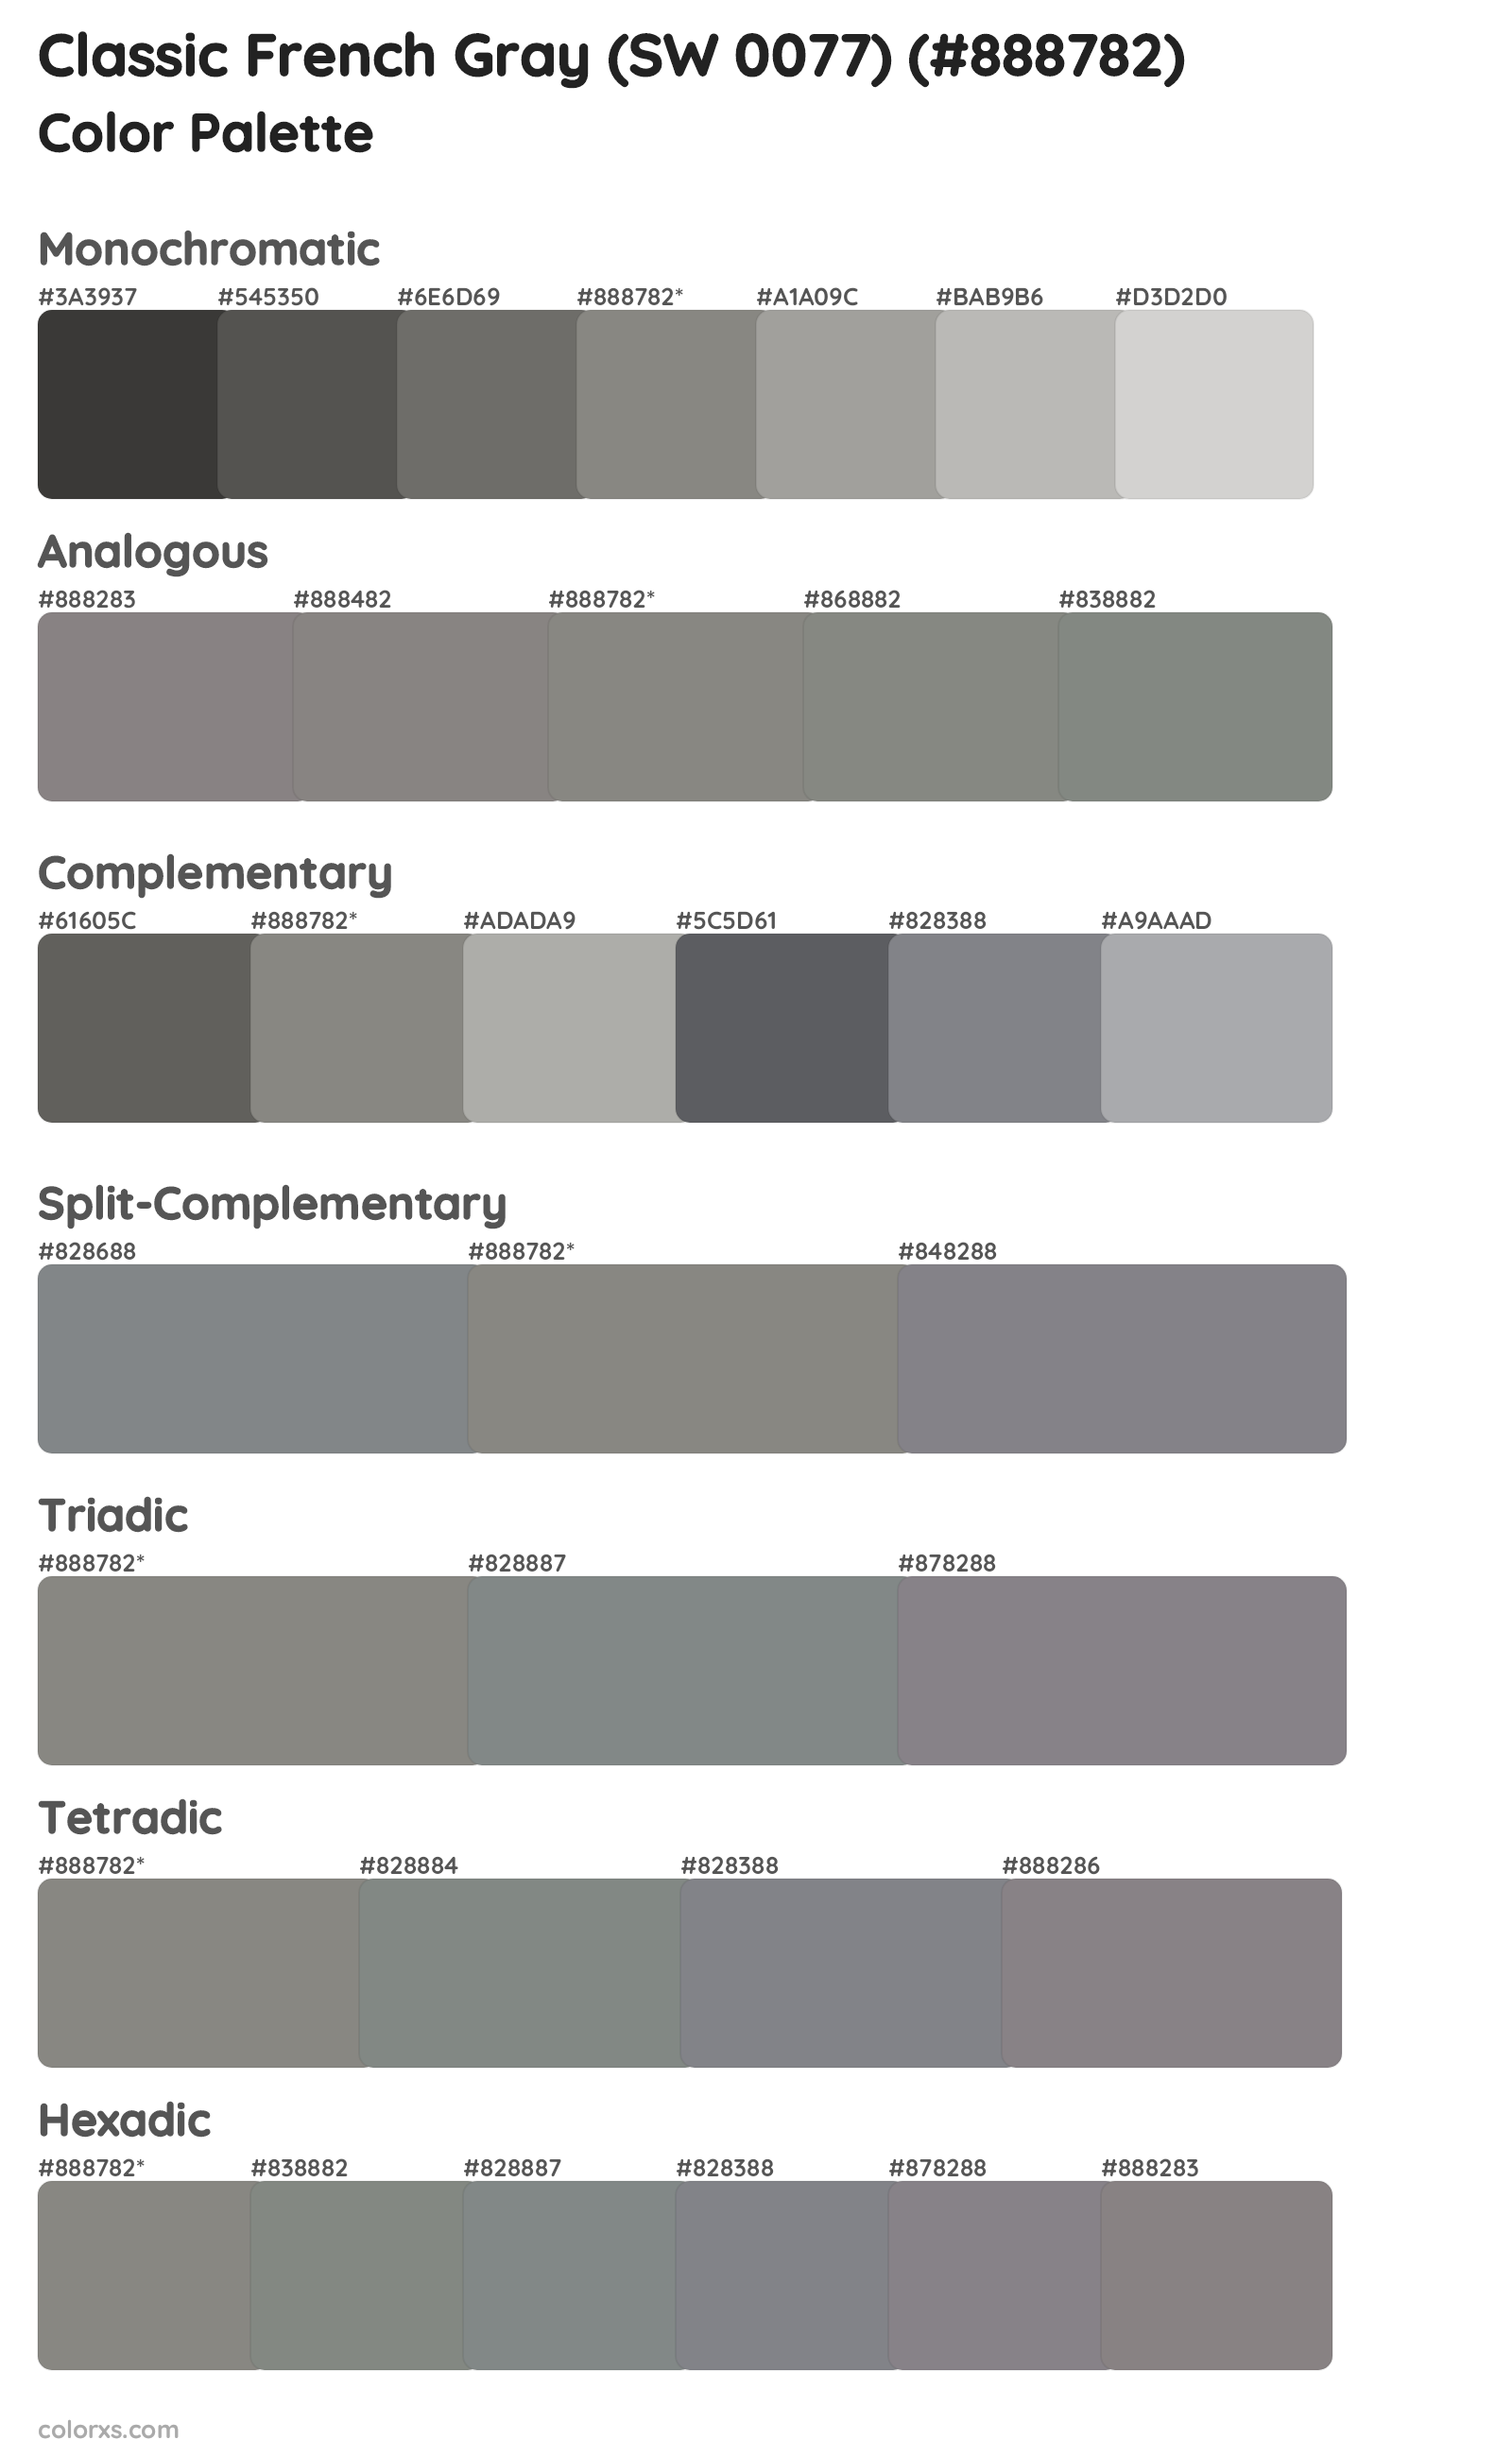 Classic French Gray (SW 0077) Color Scheme Palettes